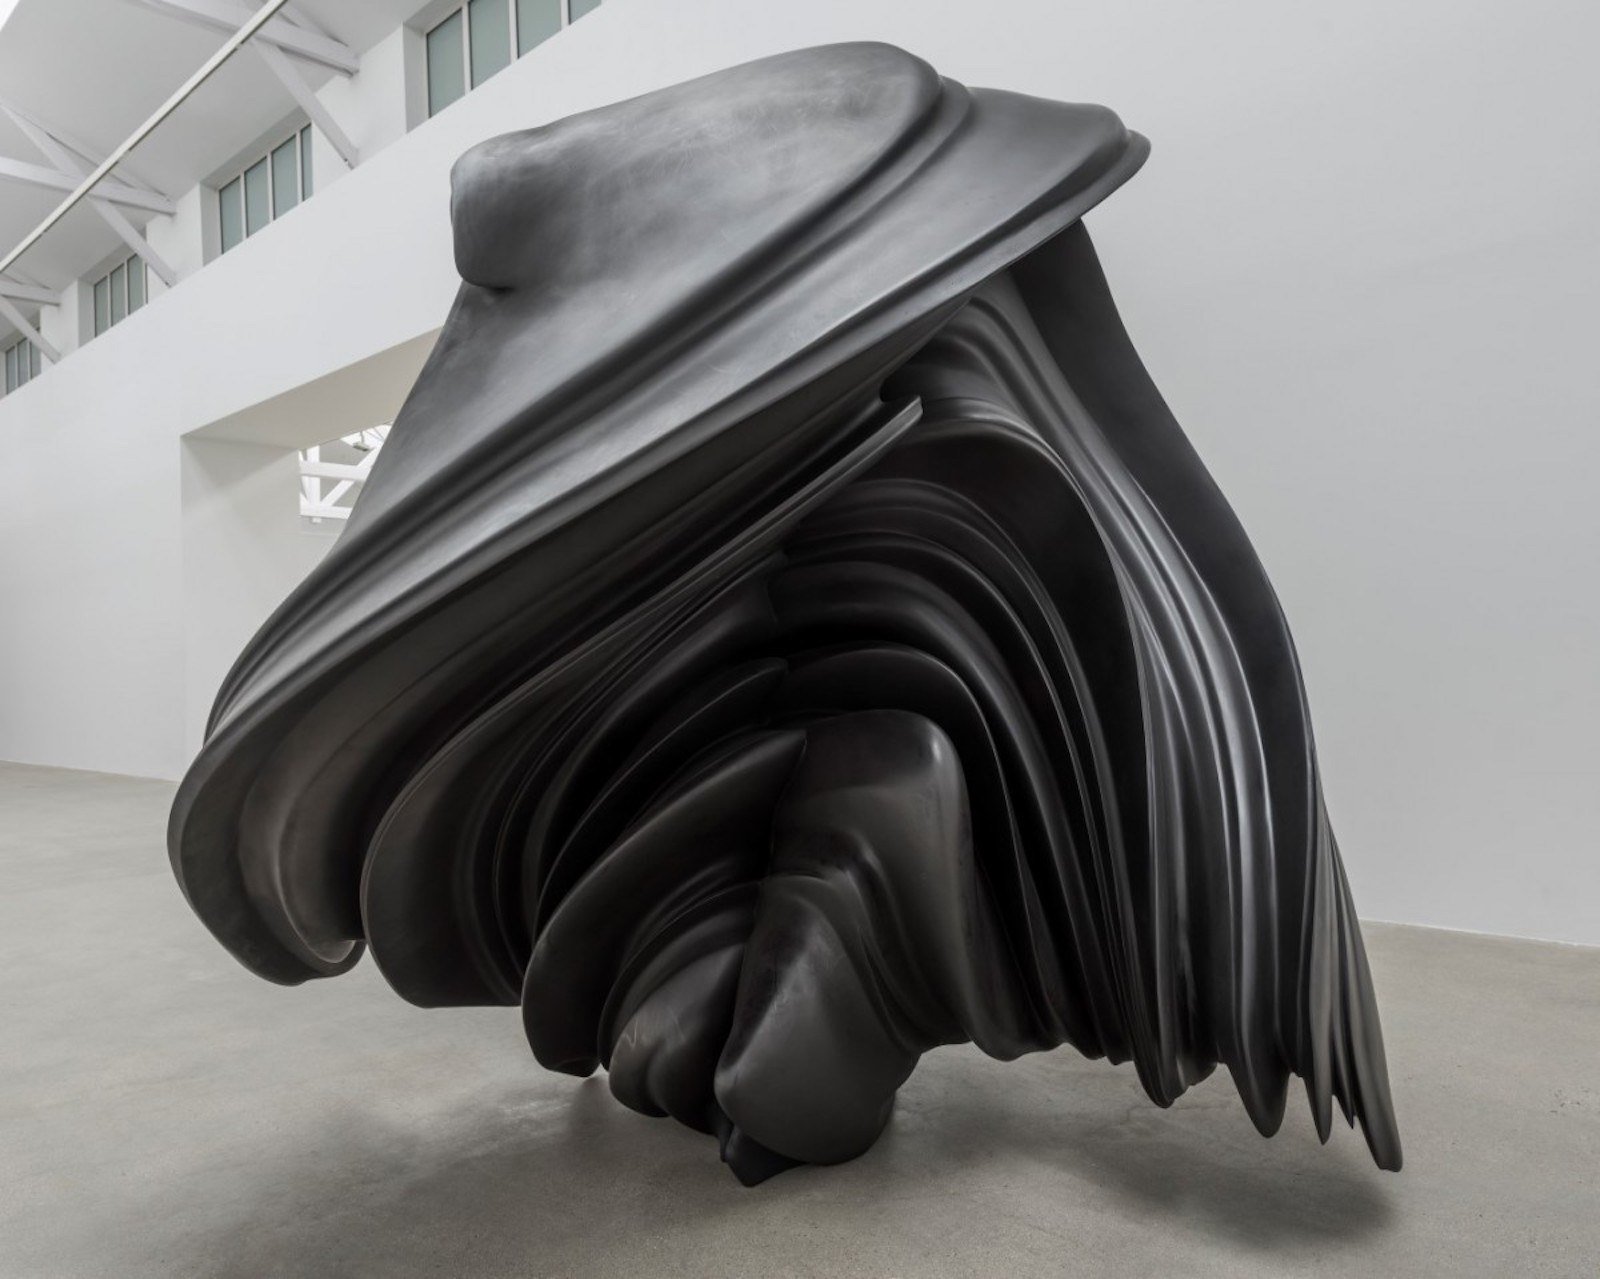 The English-born, Germany-based Tony Cragg is one of the world’s leading sc...